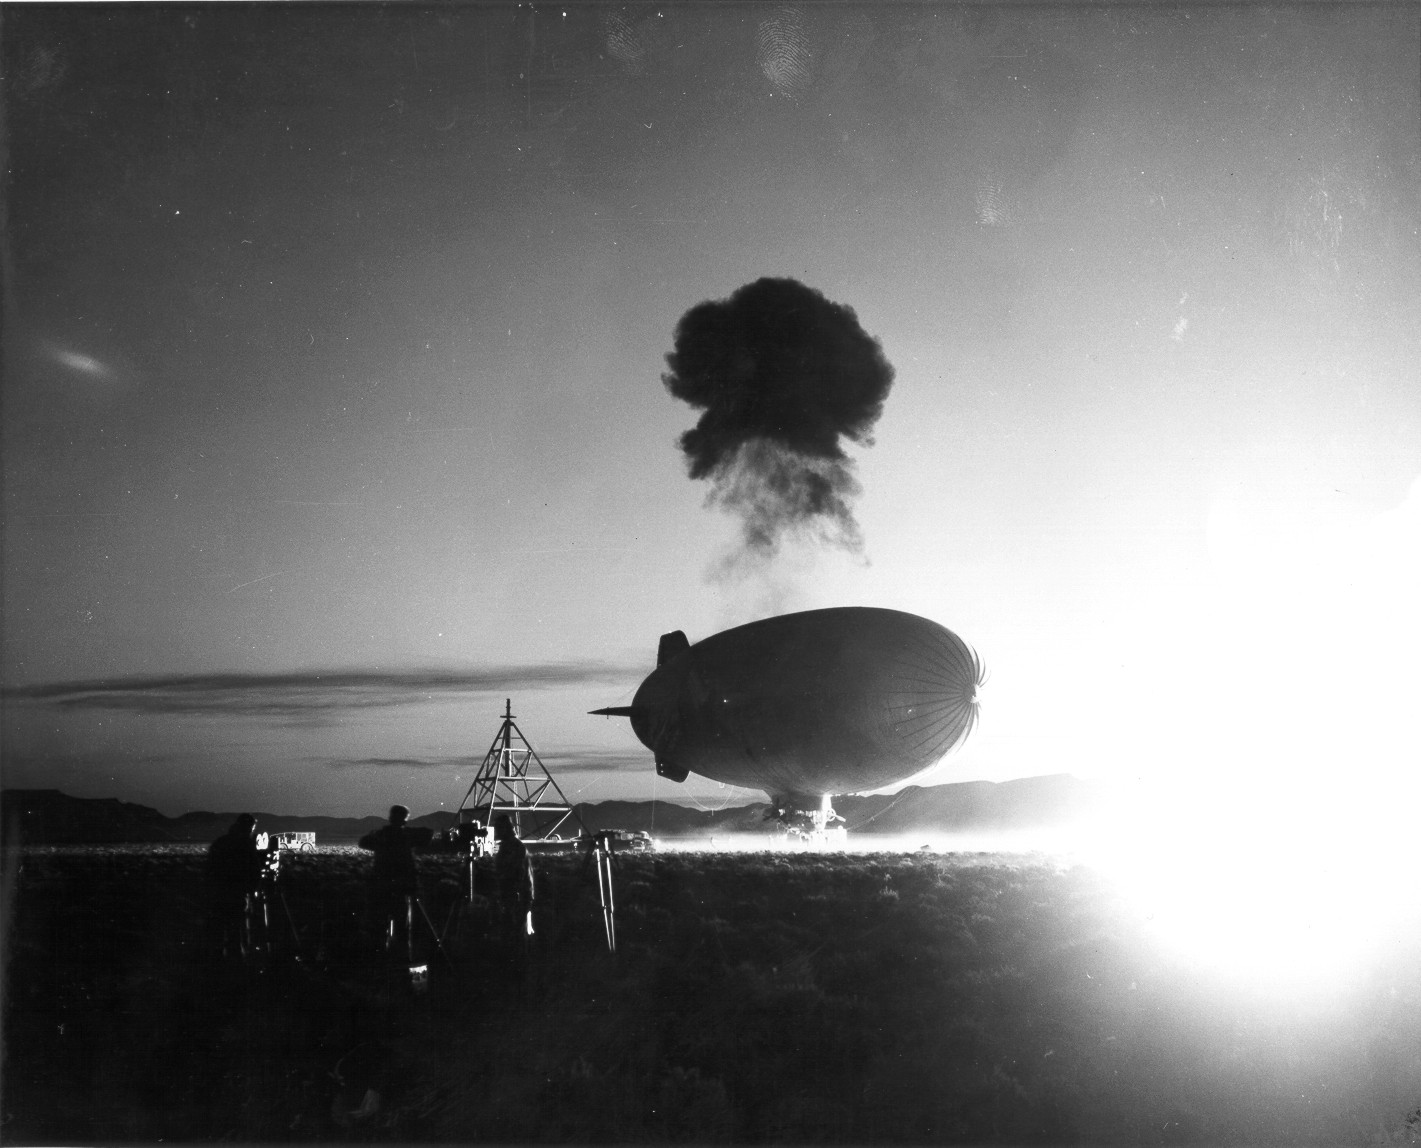 Nuclear test at Nevada Test Site 1957 with a Navy barrage balloon